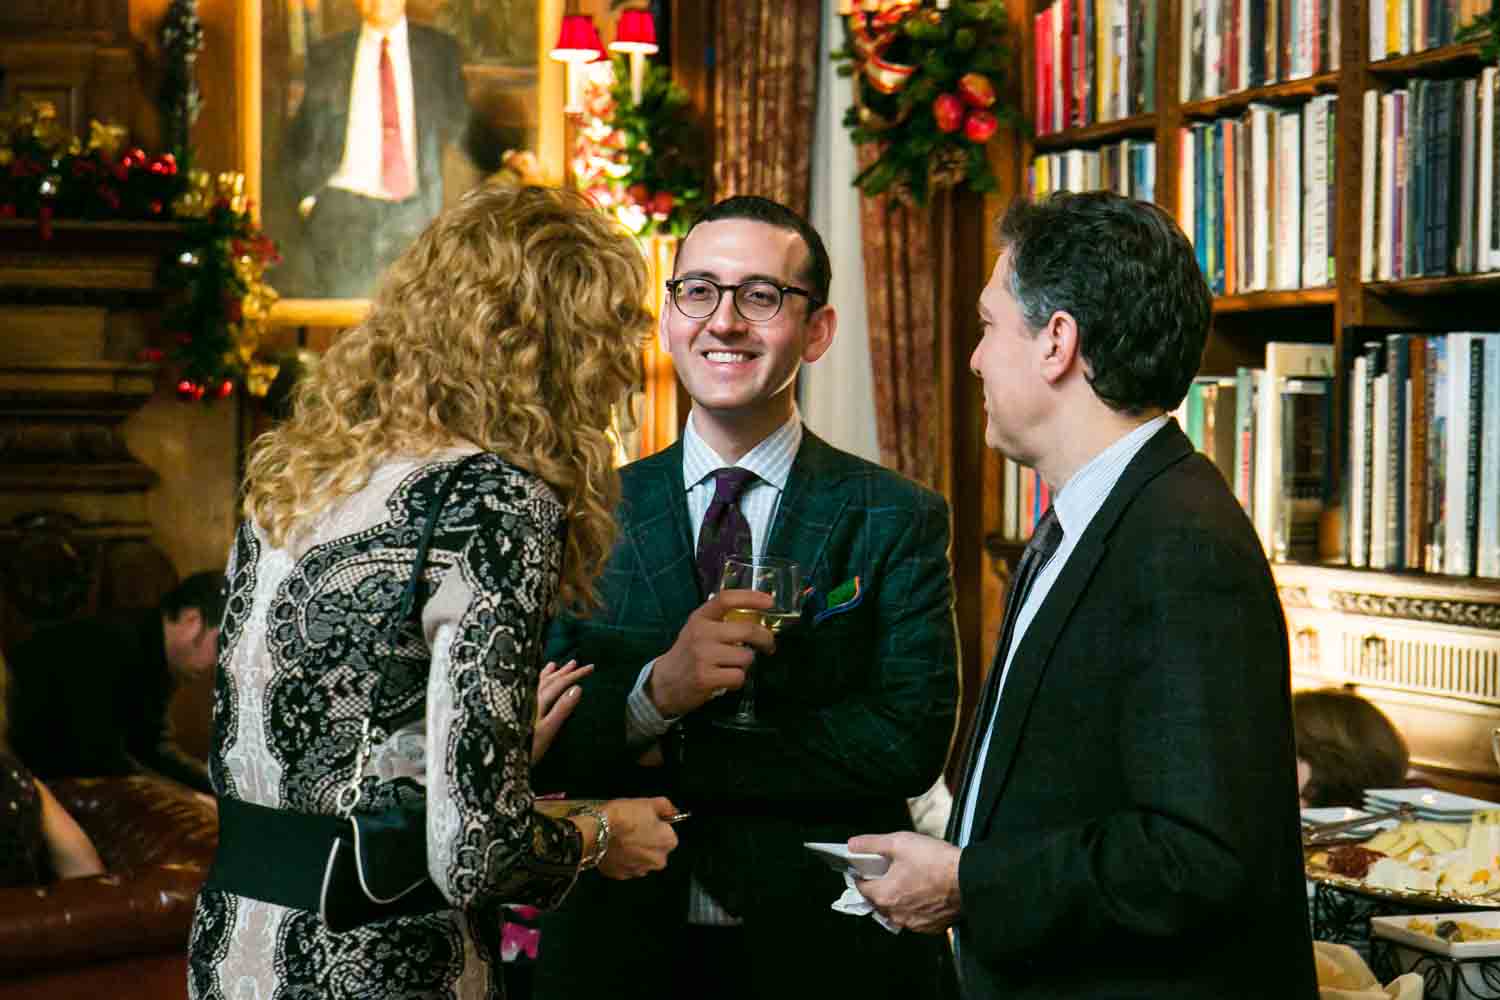 Groom and guests talking in library at a Lotos Club engagement party